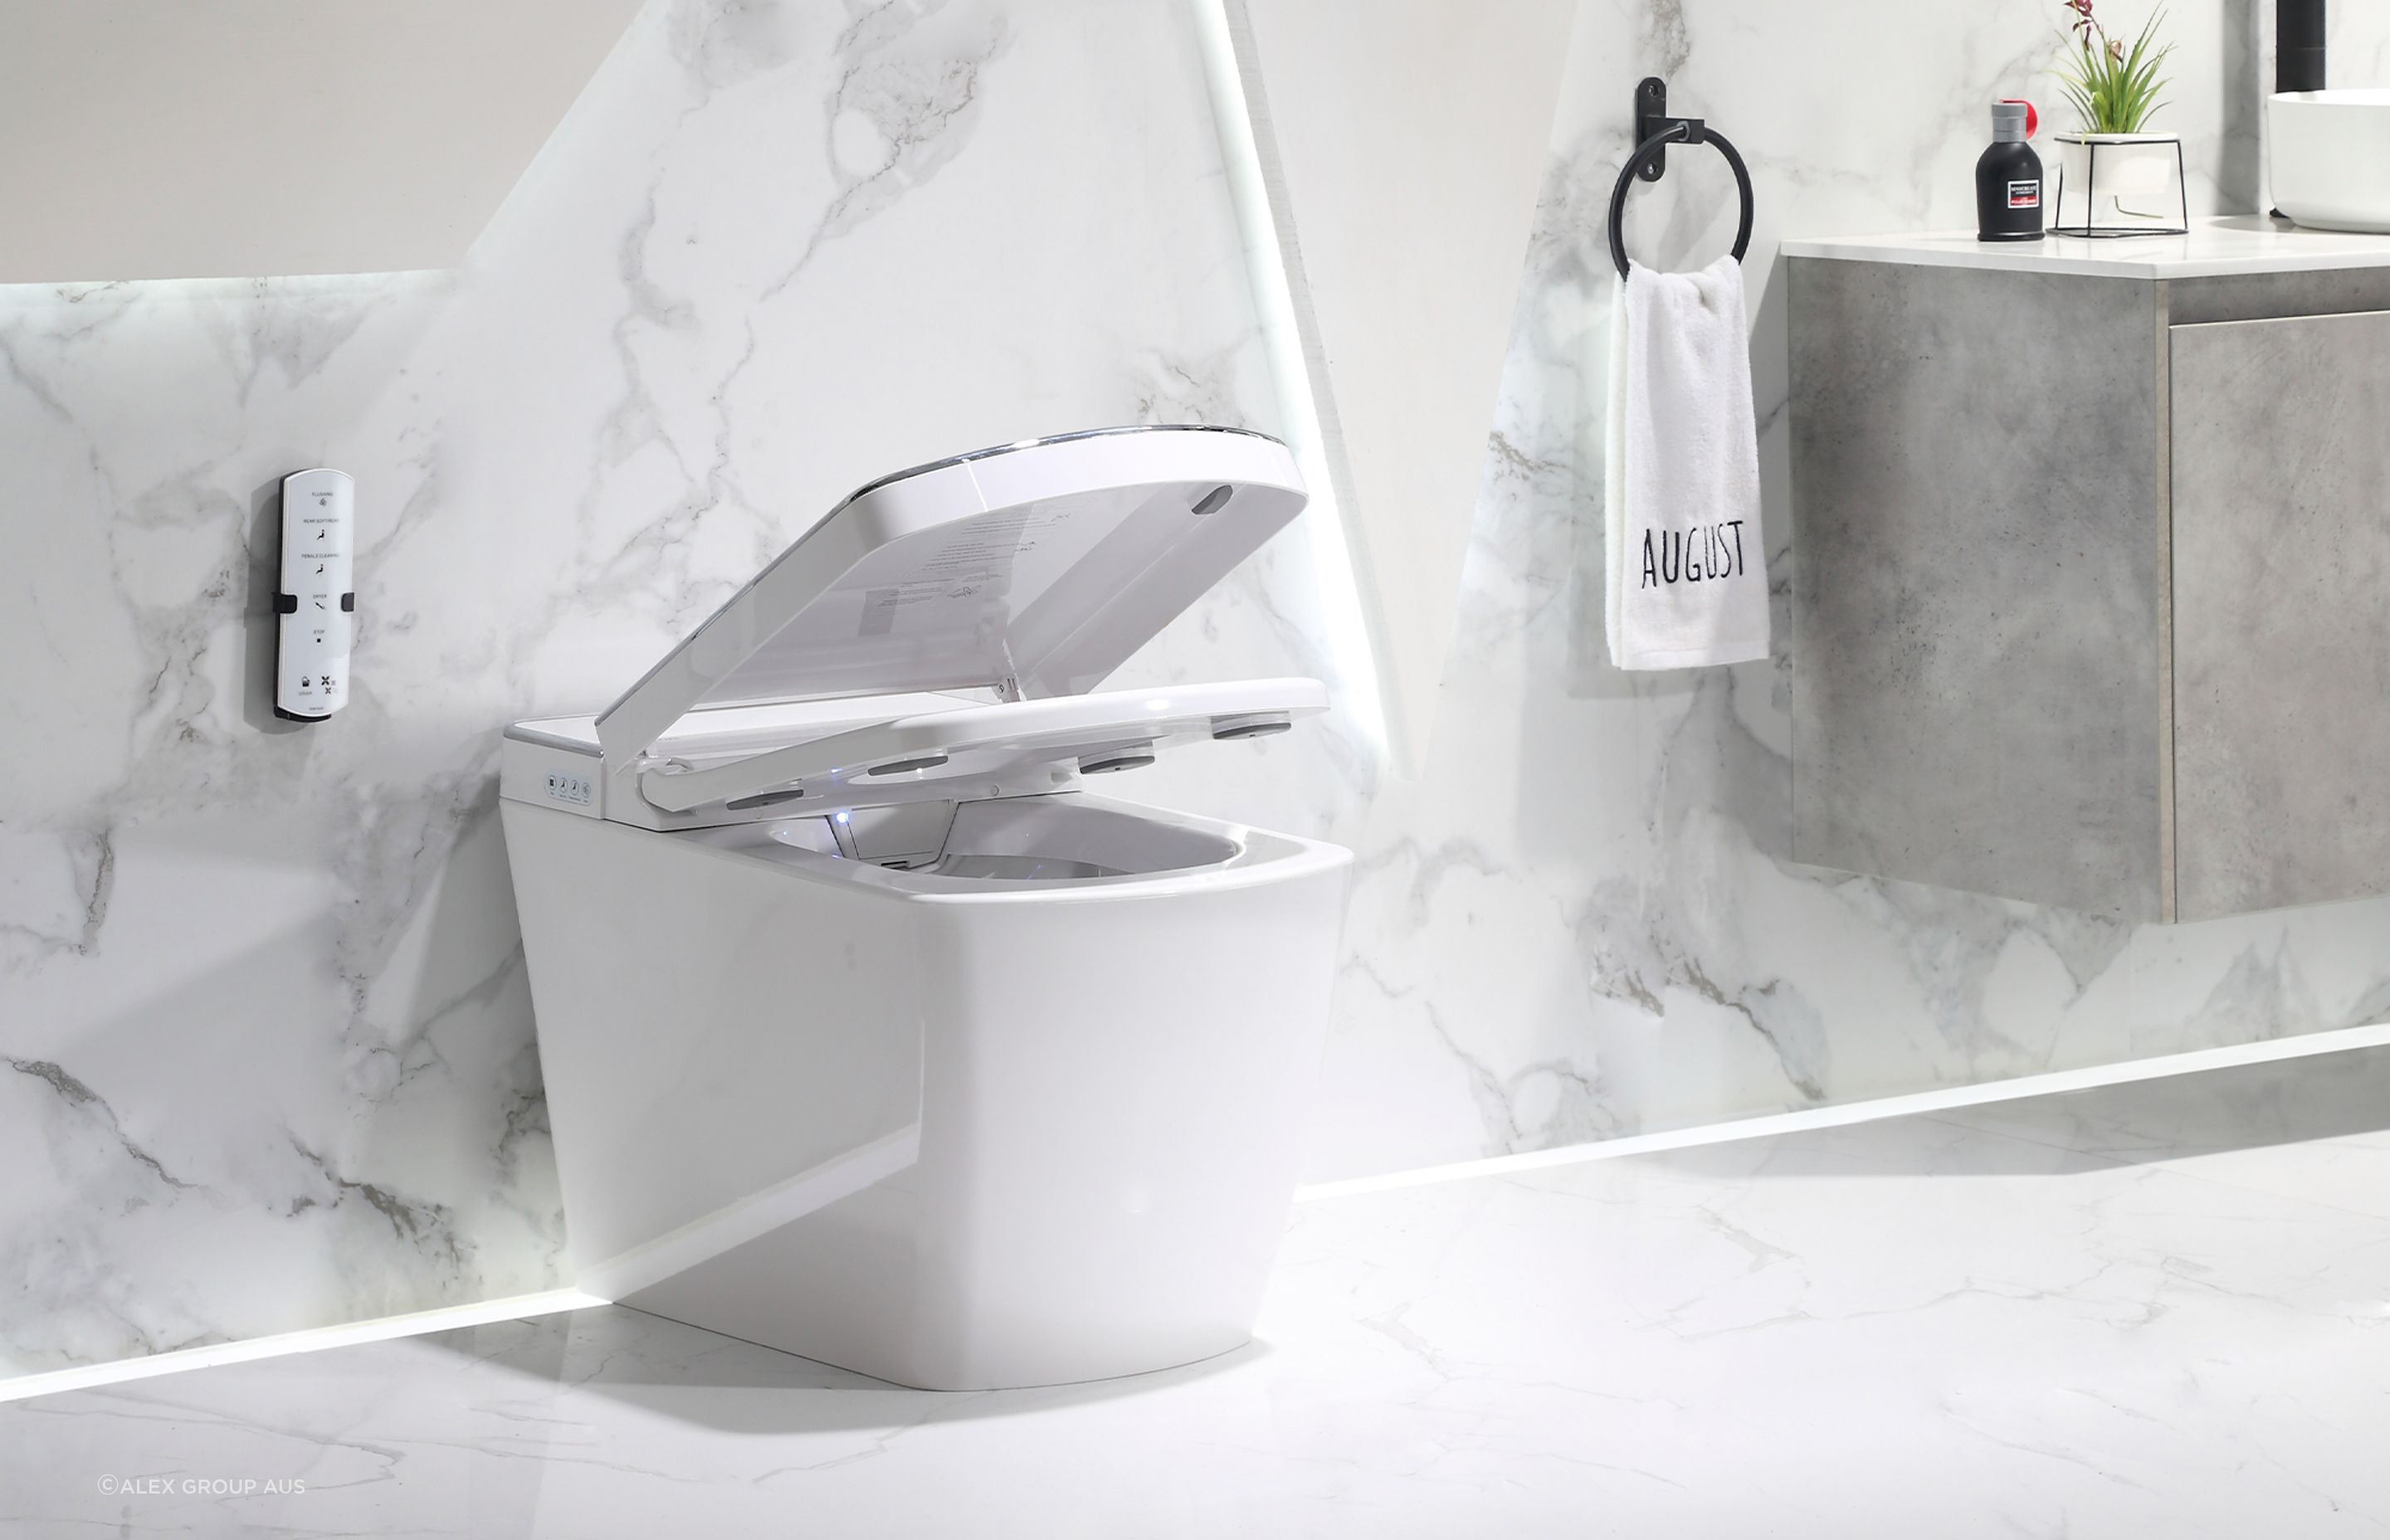 Smart toilets such as the Lafeme Lucci are becoming increasingly popular